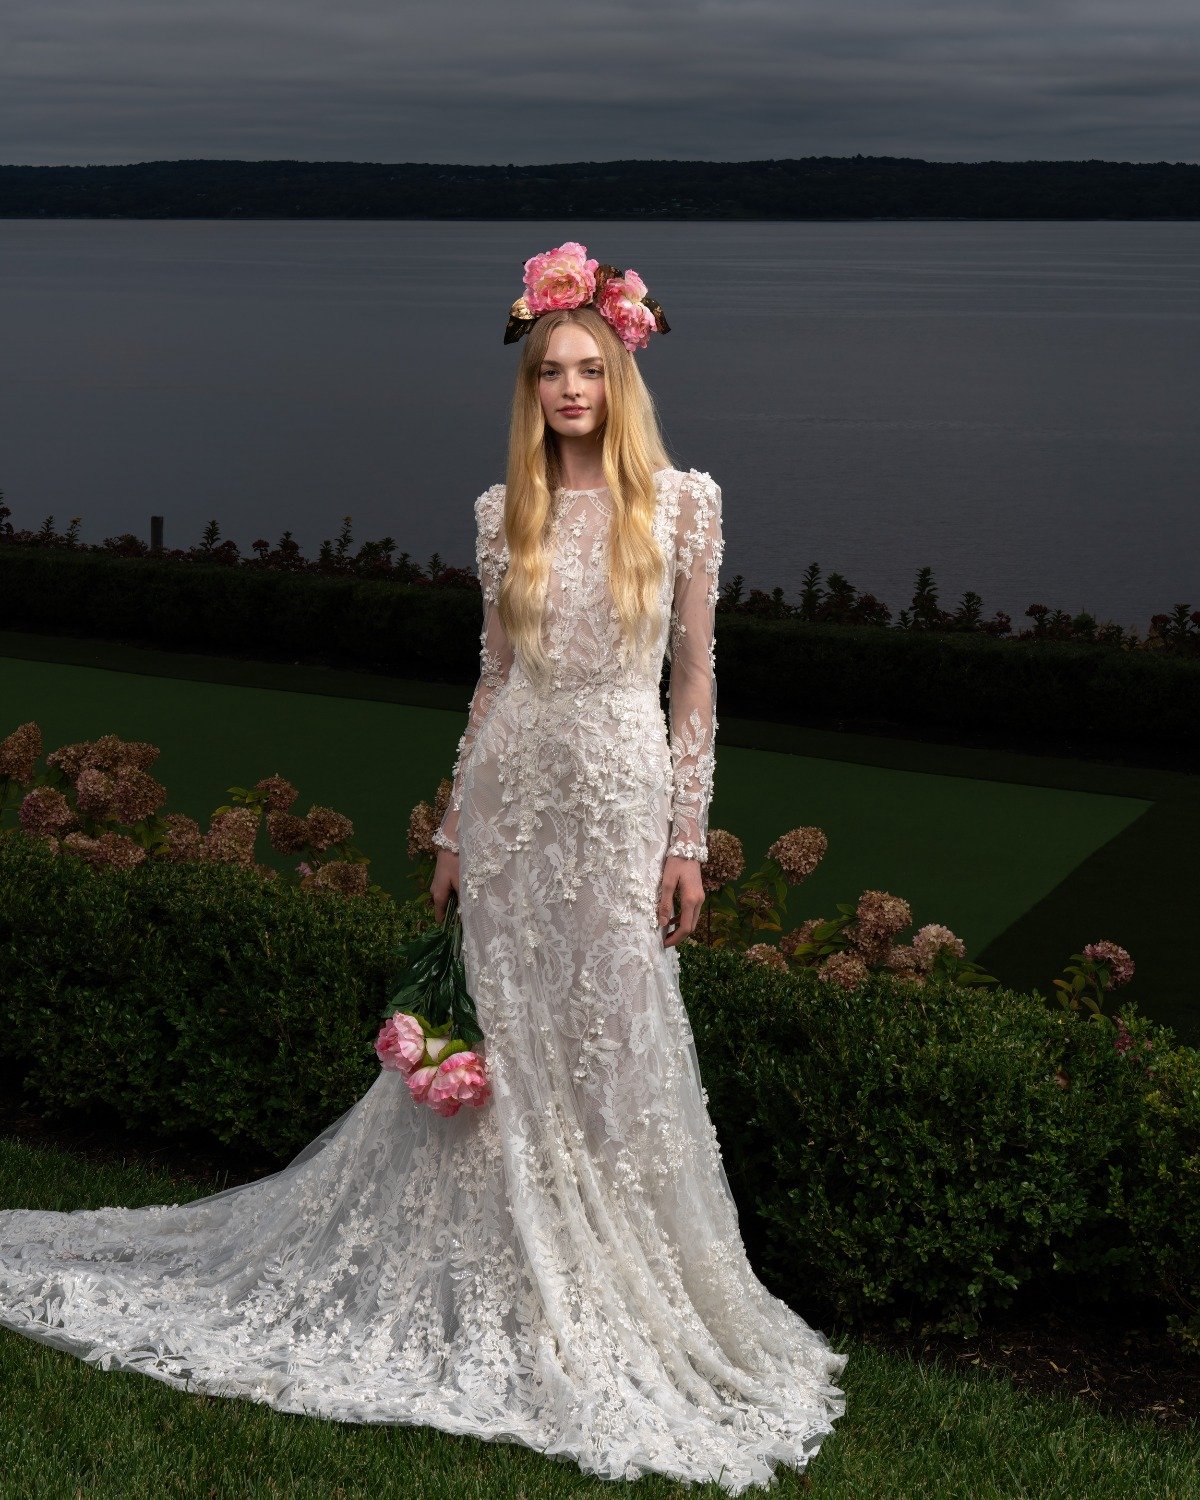 Straight From The Runway To The Aisle, Brides Can Get Reem Acra's 'Love From Above' Collection In Stores Now